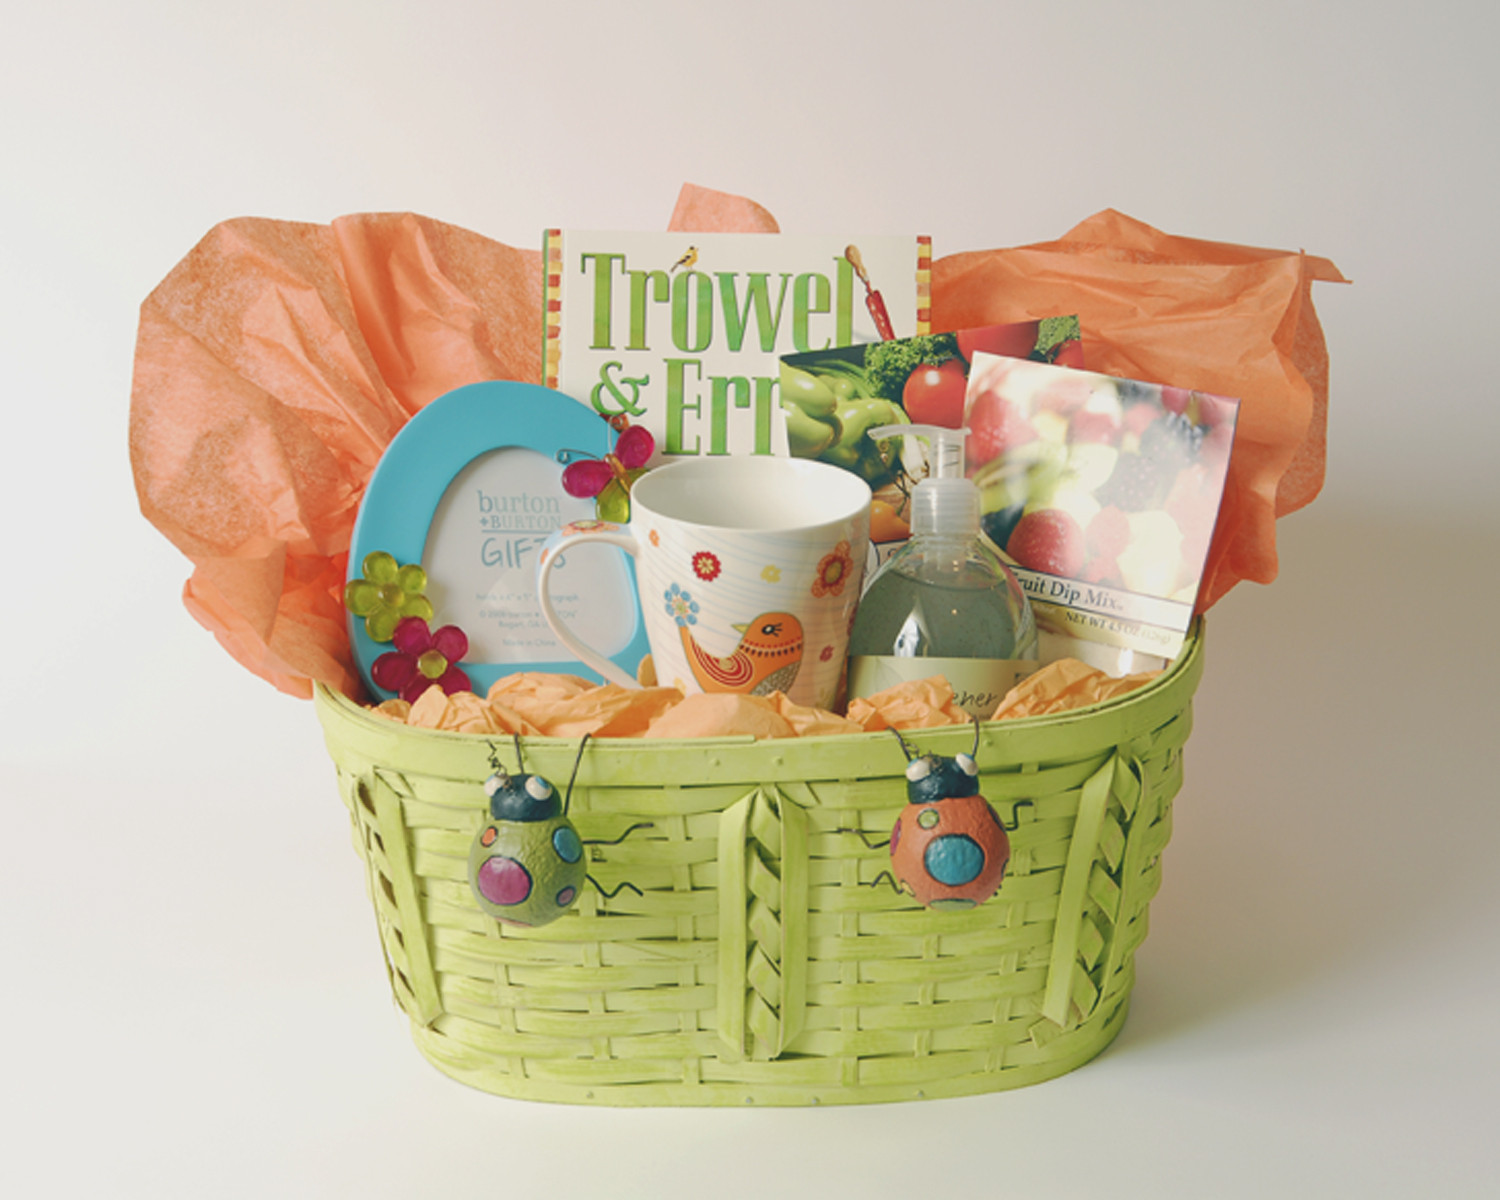 Gift Baskets Ideas For Women
 Thoughtful Presence 5 Great Gift Basket Ideas For Women